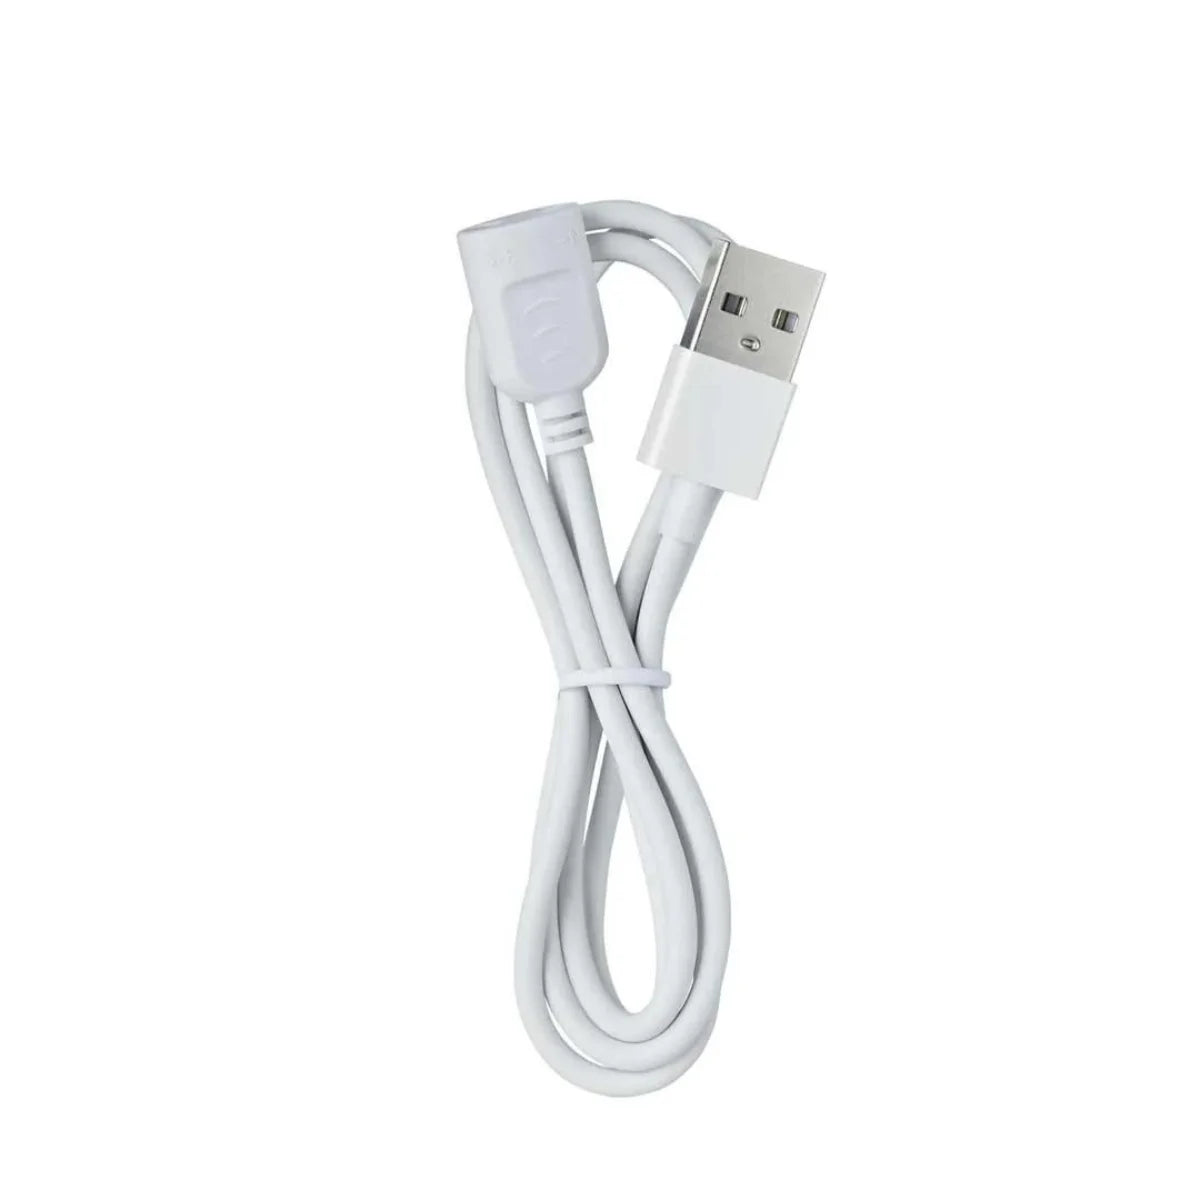 white 2metre 2-pin usb charging cable for WildOnes Kids Electric Toothbrushes for toddlers